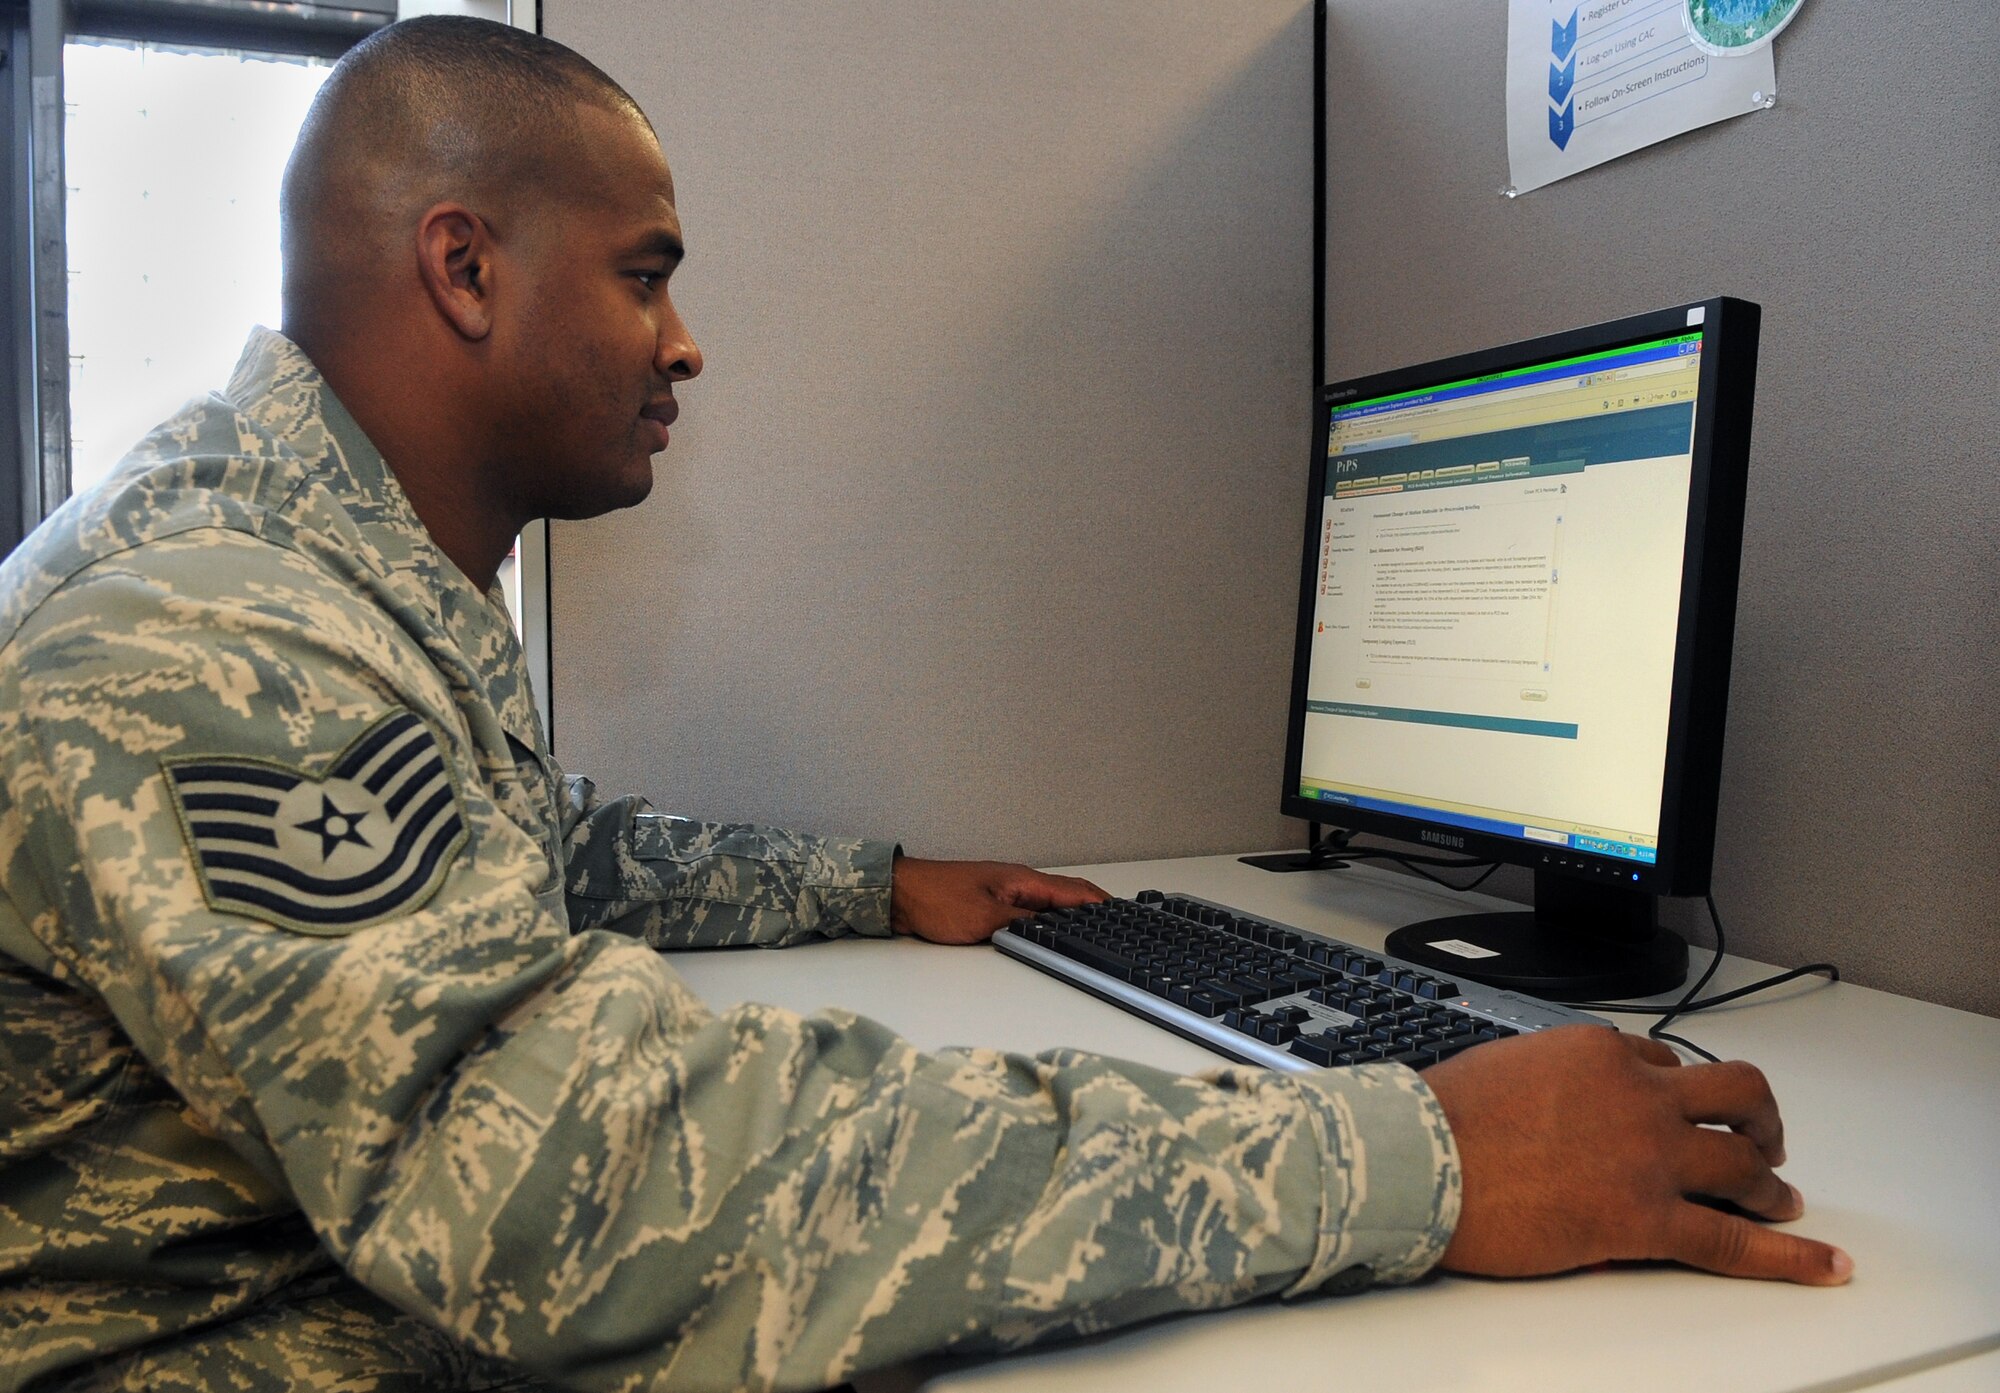 Tech. Sgt. Modesto Martinez, 460th Force Support Squadron, uses the PCS In-processing System at "The Source" at the military personnel flight Oct. 19. "The Source" is Buckley Air Force Base's eFinance self-help center, an all in one station where Airmen can take care of their financial services. (U.S. Air Force photo by Senior Airman John Easterling)